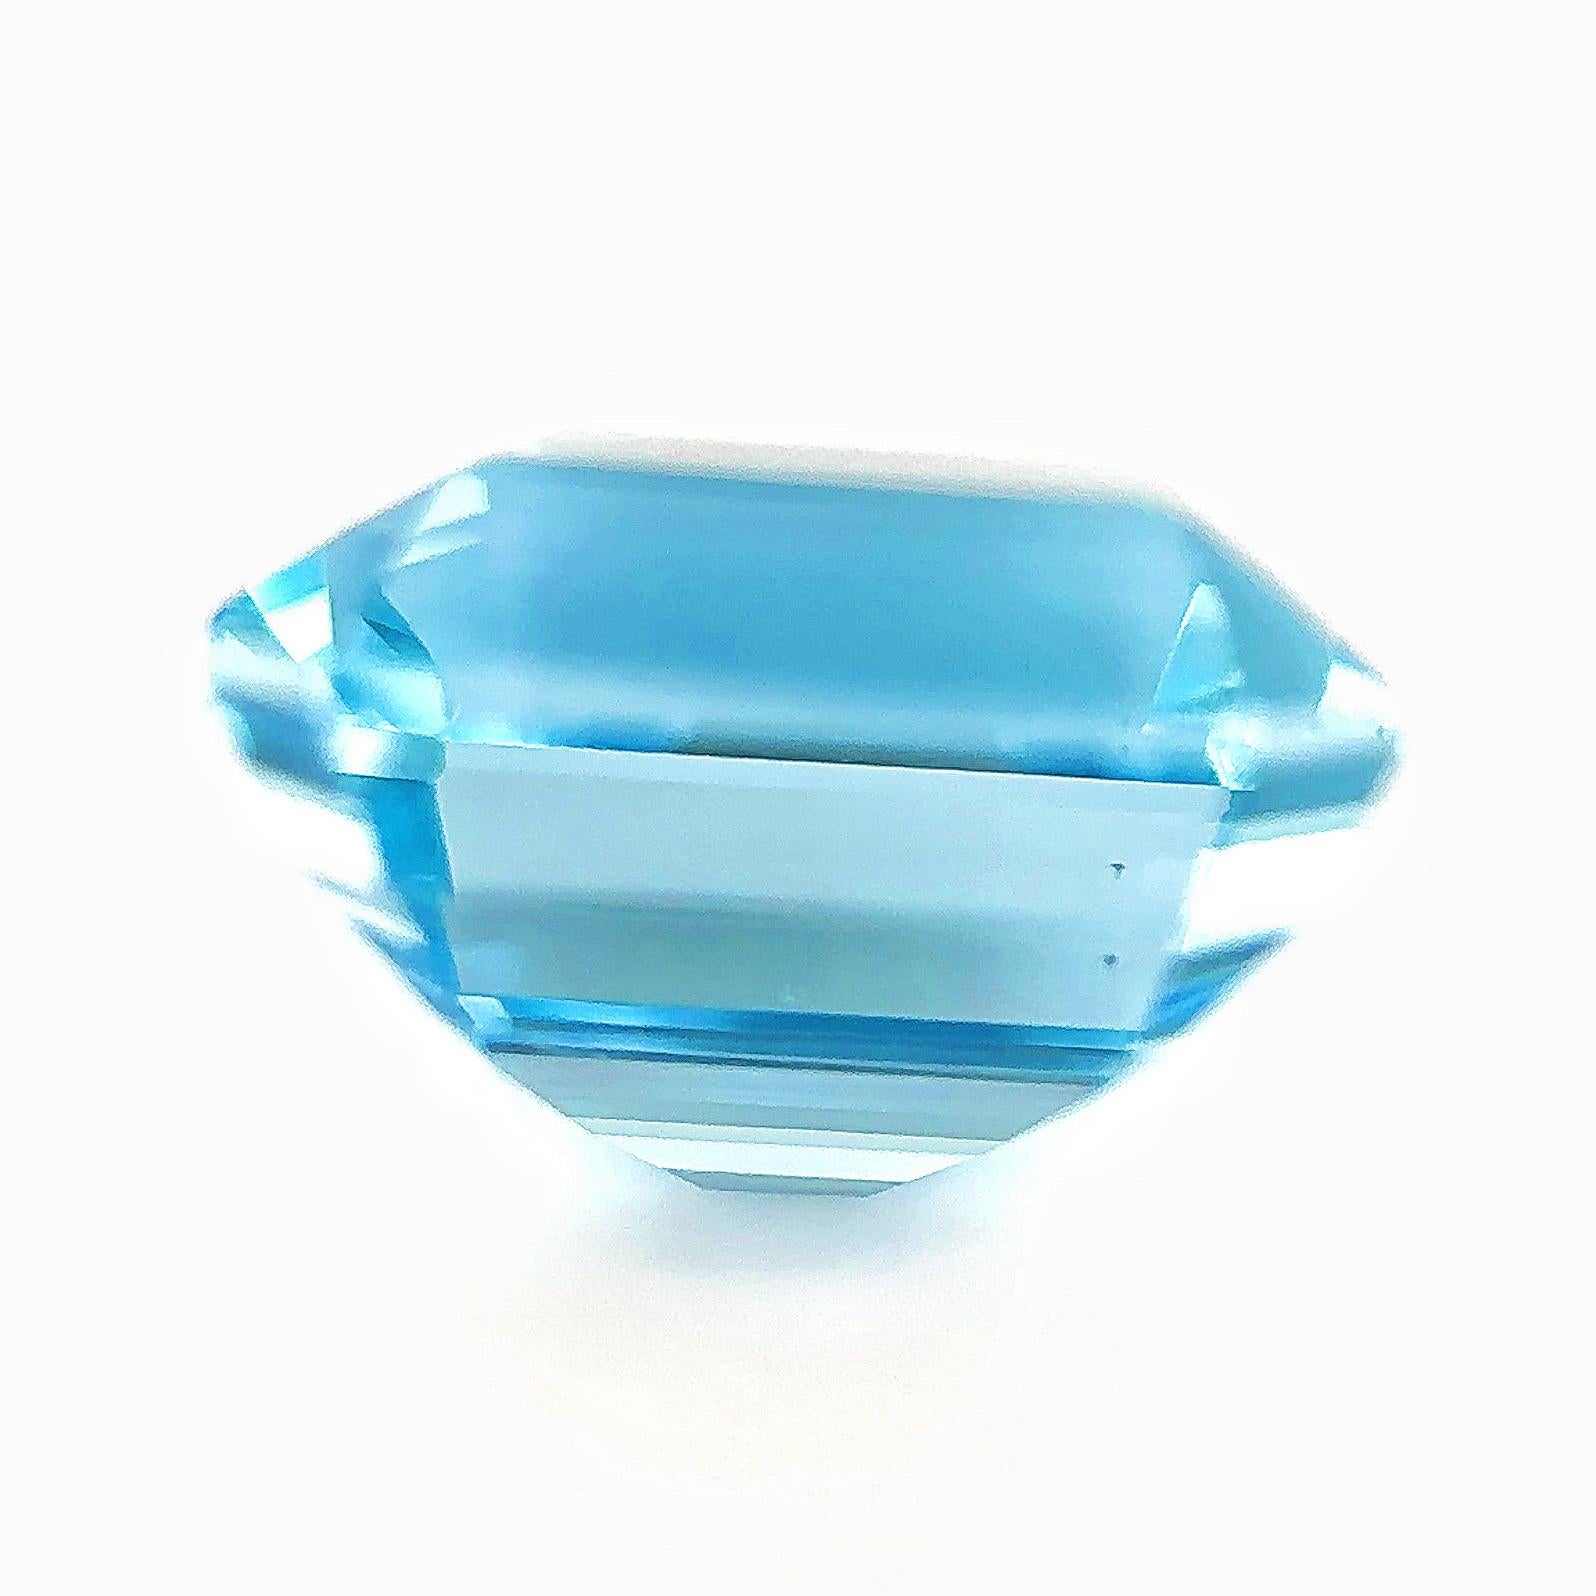 3.24 Carat Natural Santa Maria Color Aquamarine Loose Stone

Appointed lab certificate can be arranged upon request

This Item is ideal for your design as an engagement ring, cocktail ring, necklace, bracelet, etc.


ABOUT US

Xuelai Jewellery